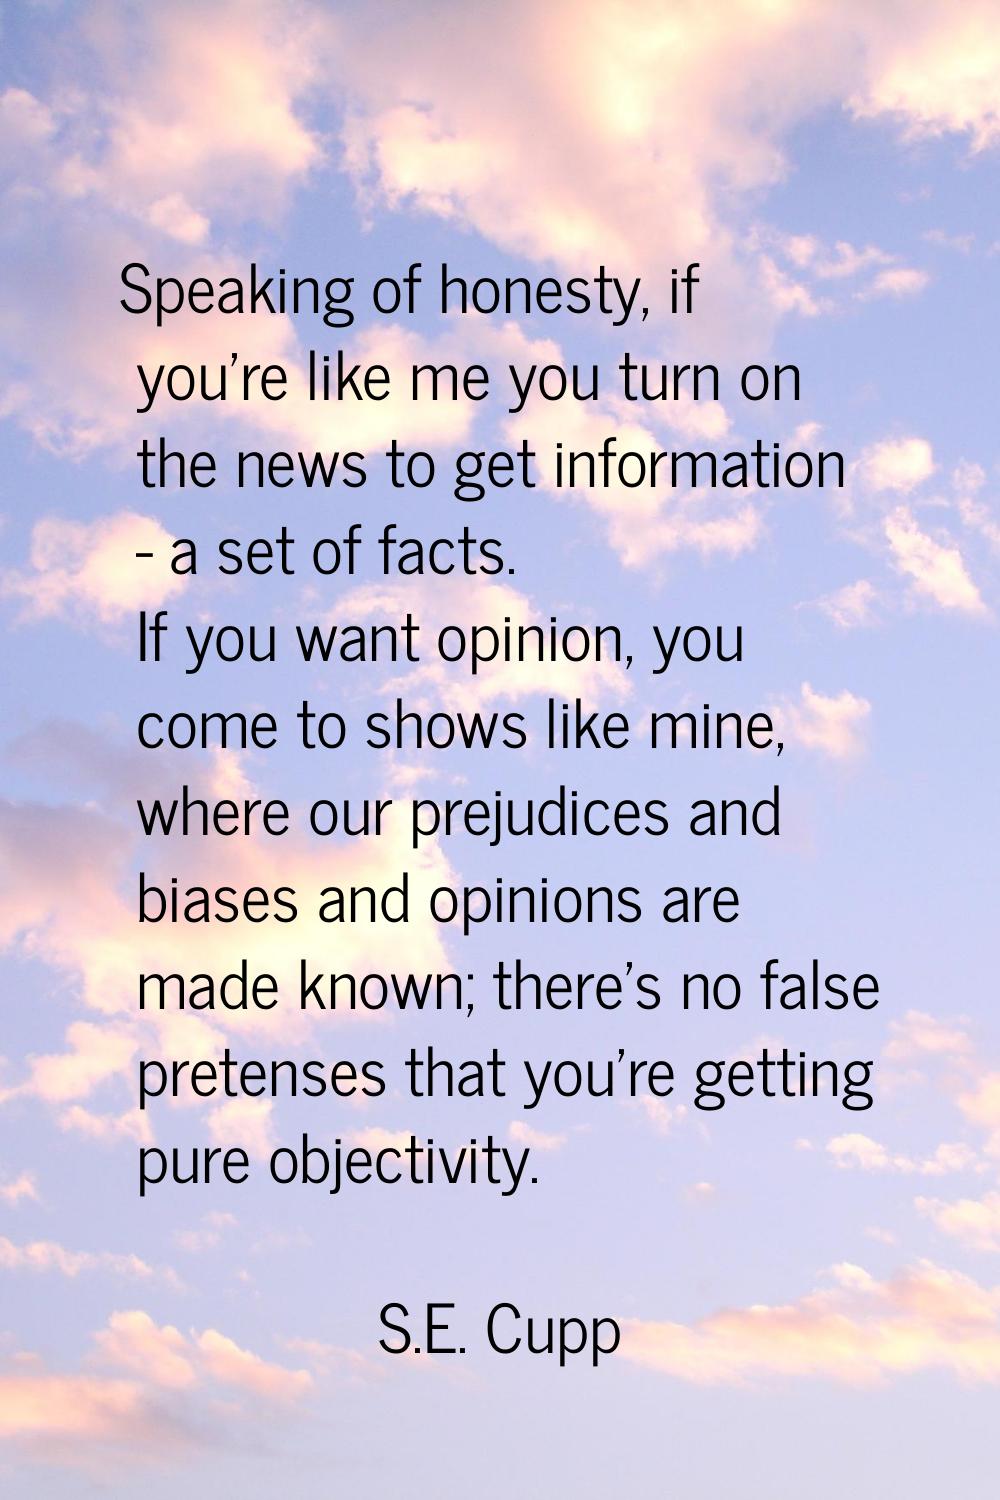 Speaking of honesty, if you're like me you turn on the news to get information - a set of facts. If